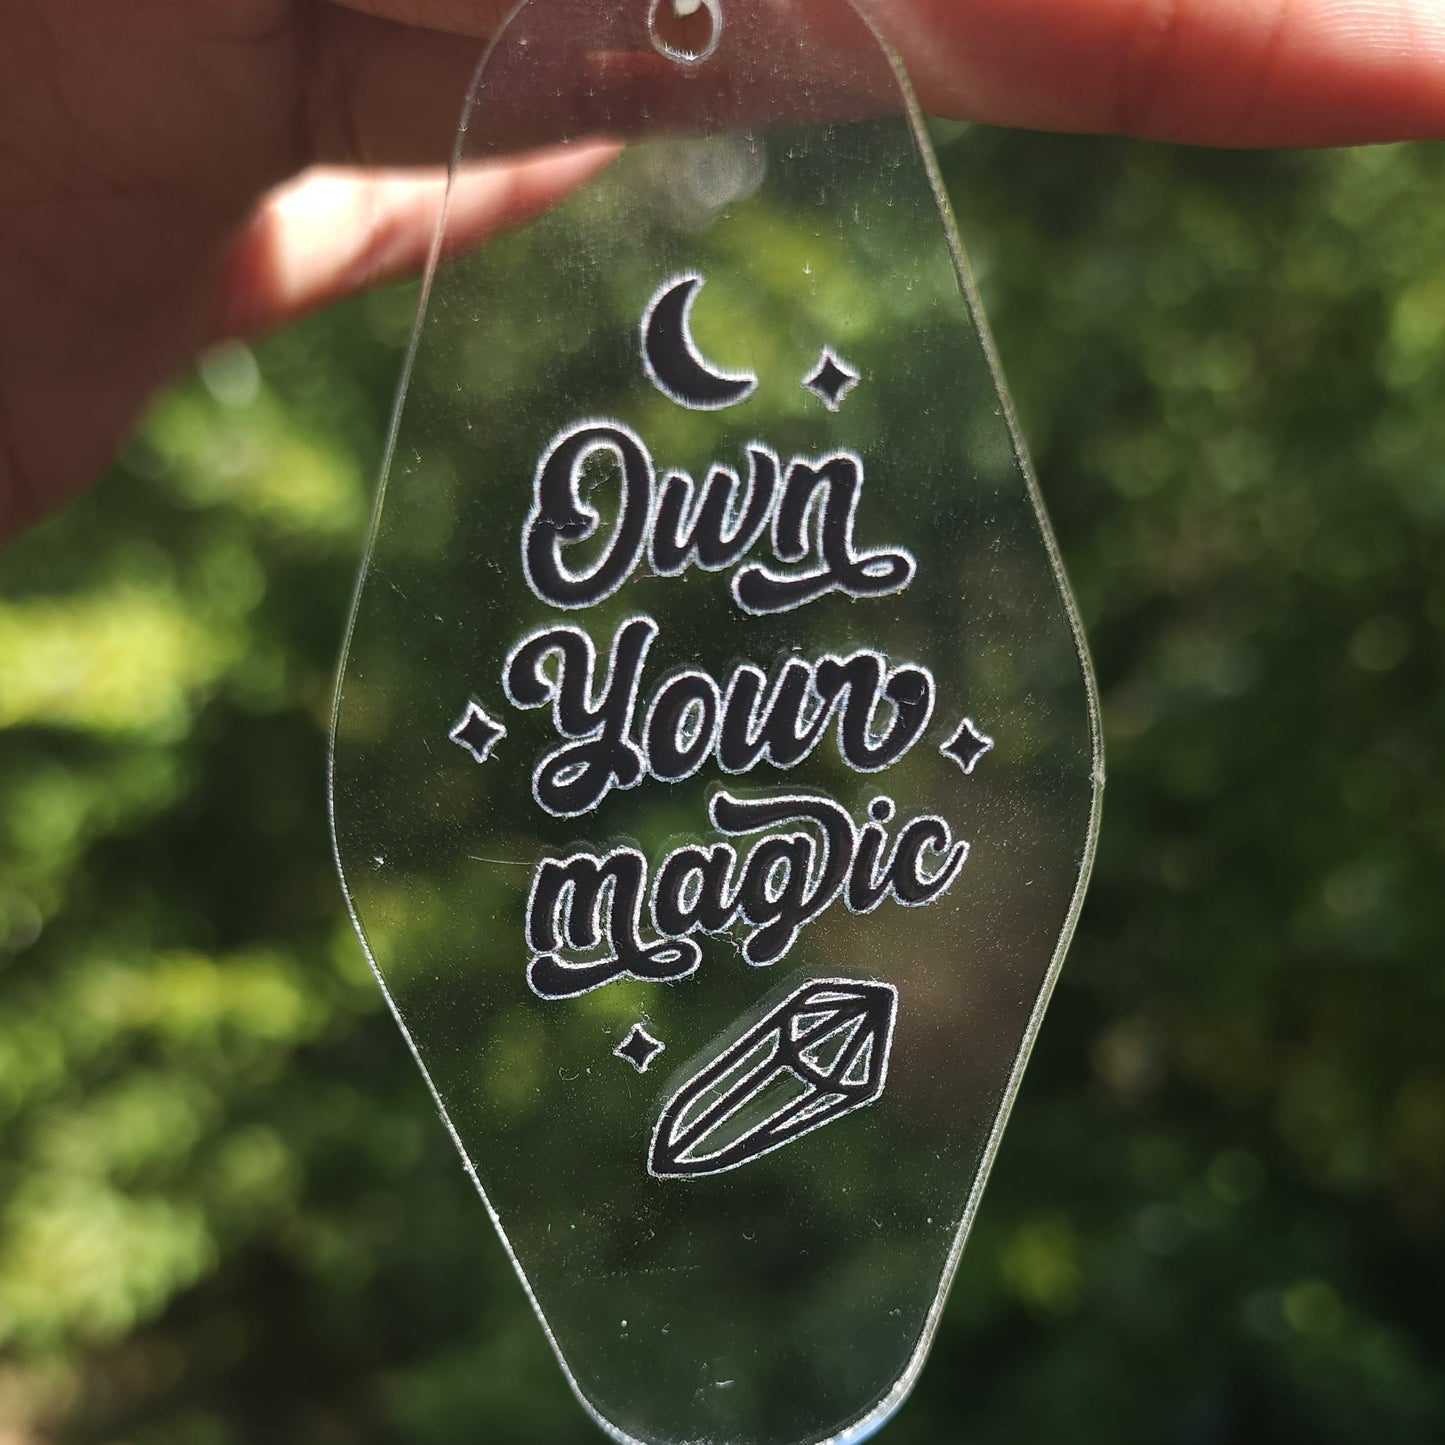 You're Magical Keychain